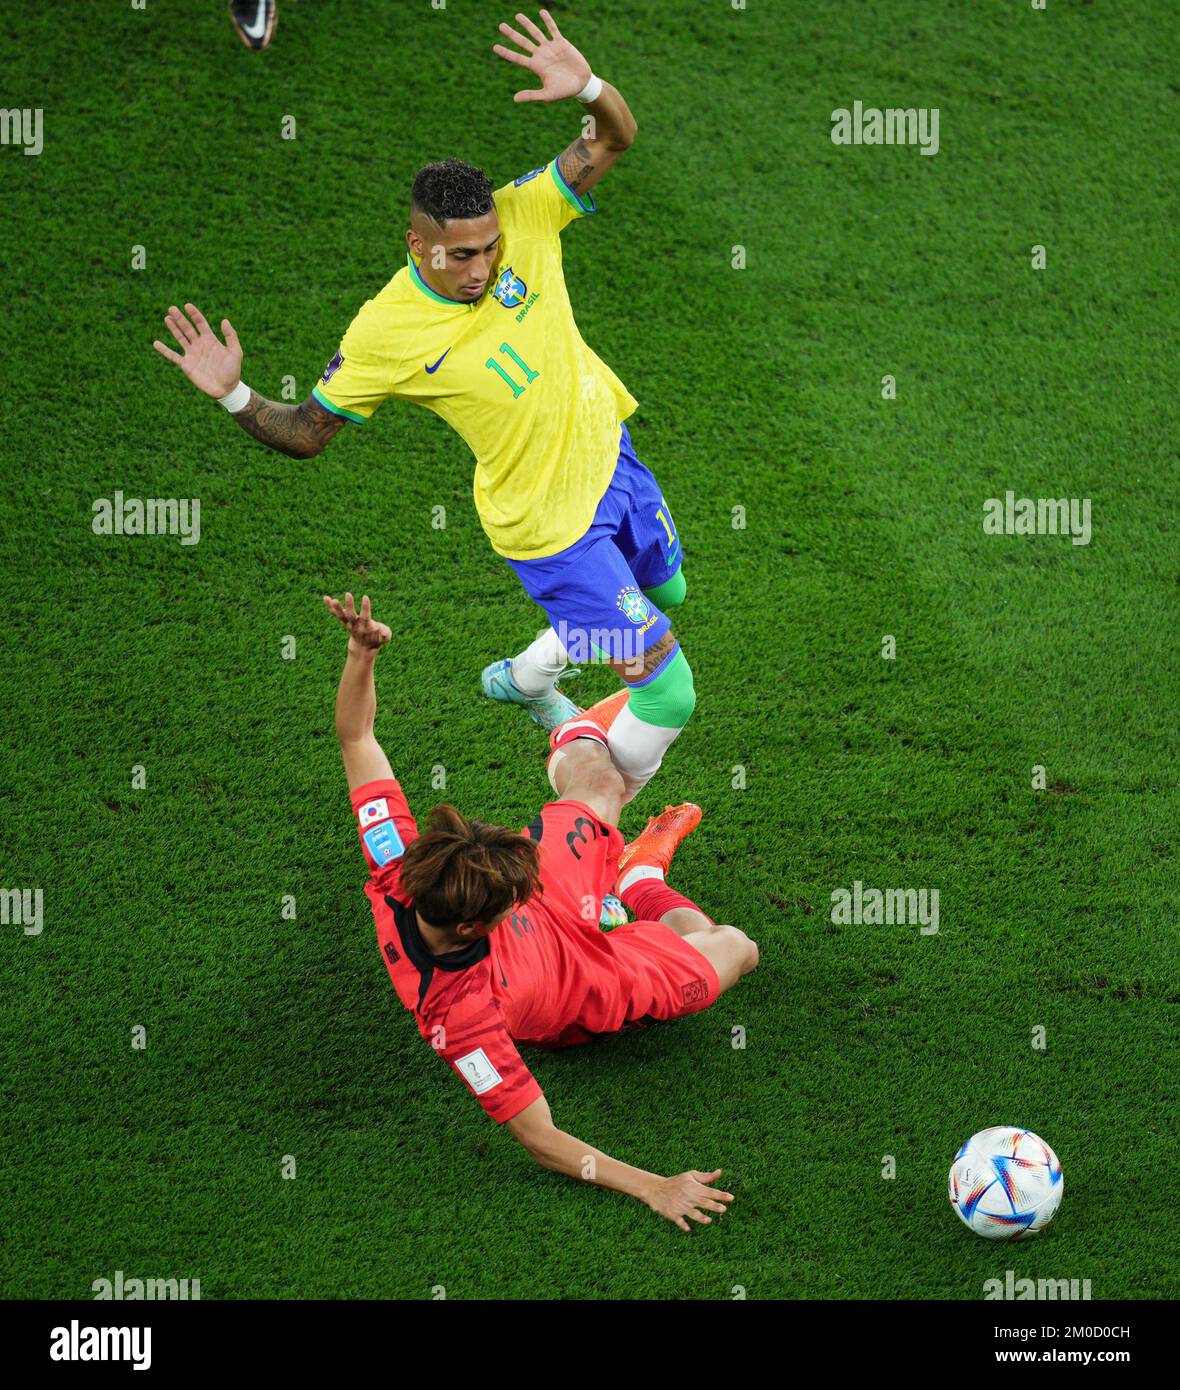 Doha, Qatar. 5th Dec, 2022. Raphinha (Up) of Brazil vies with Kim Jin-su of South Korea during the Round of 16 match between Brazil and South Korea at the 2022 FIFA World Cup at Stadium 974 in Doha, Qatar, Dec. 5, 2022. Credit: Xin Yuewei/Xinhua/Alamy Live News Stock Photo